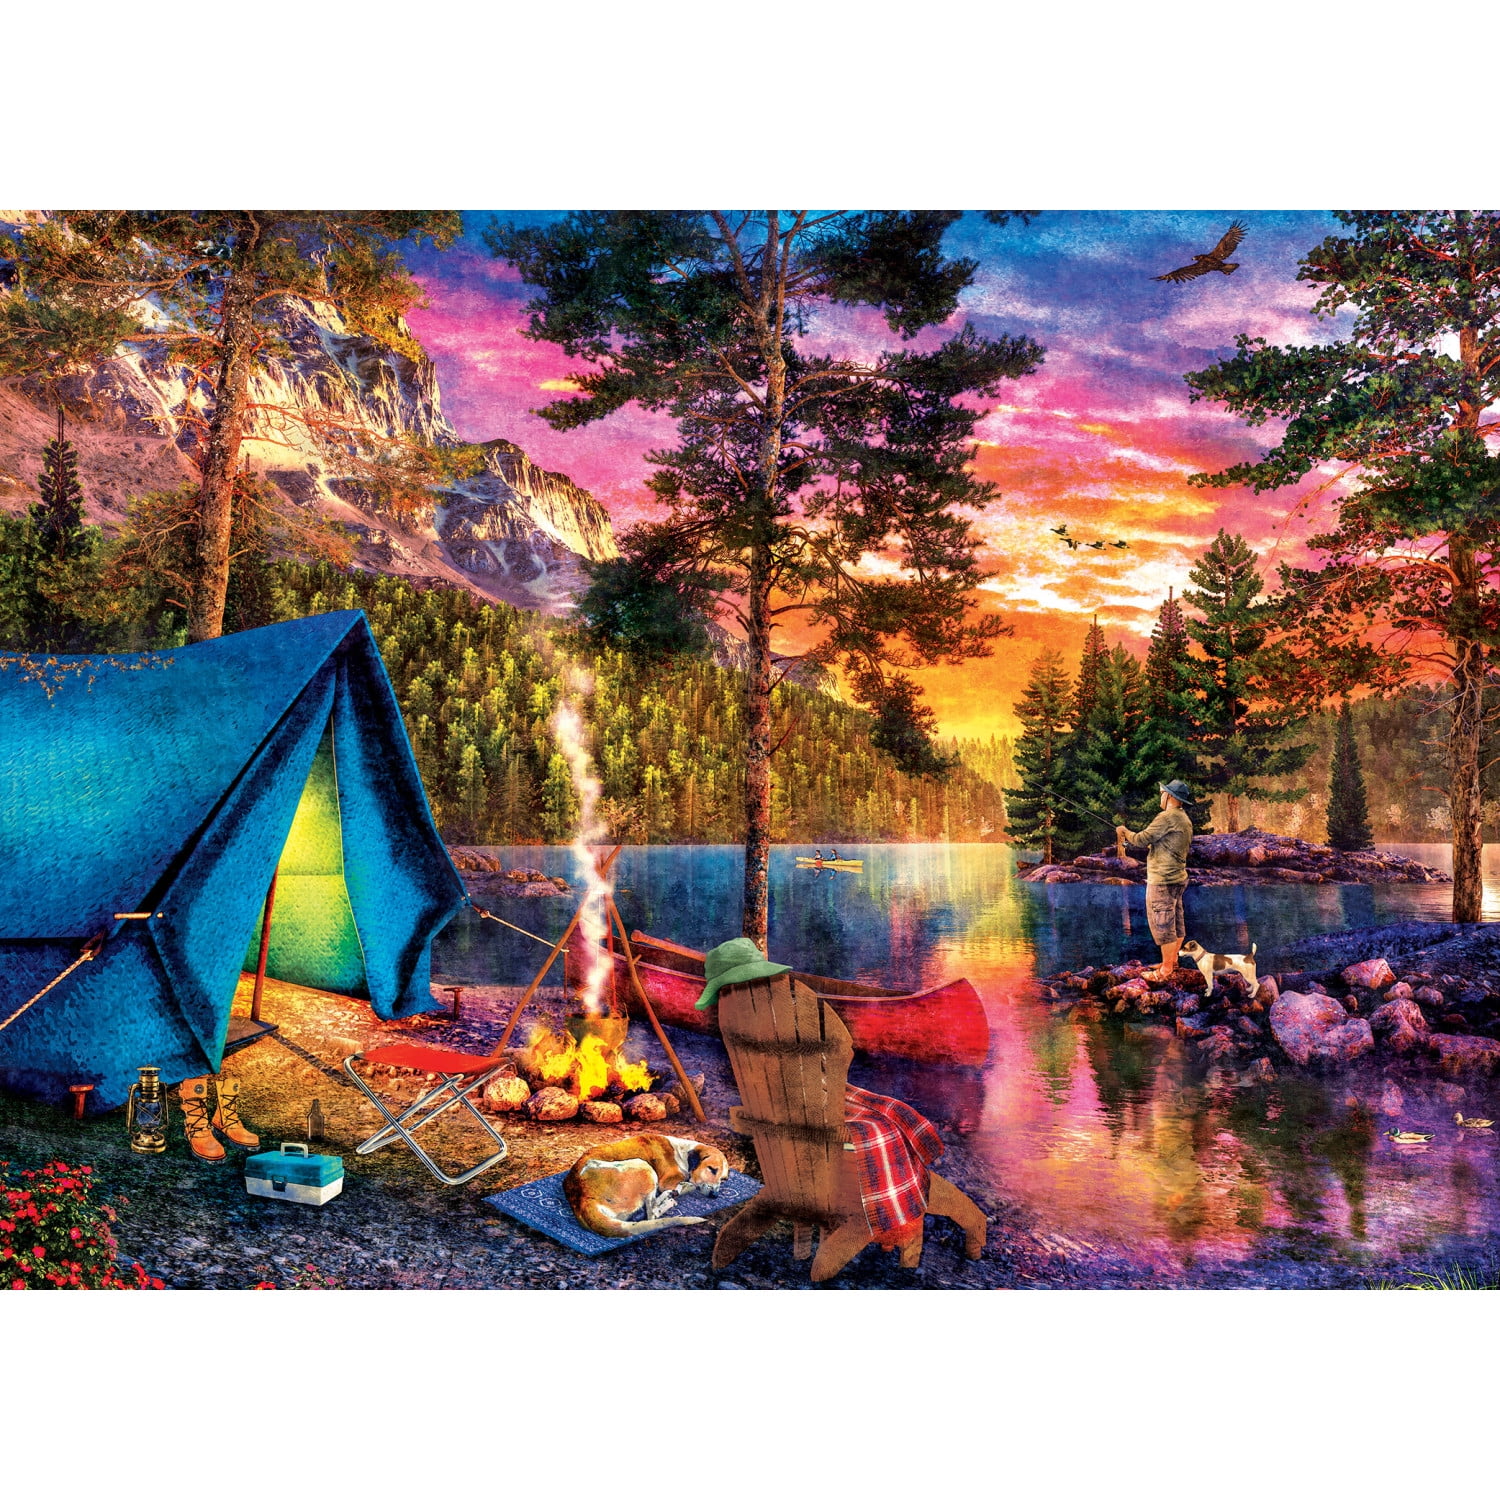 MasterPieces REALTREE Gone Fishing 1000 Piece Puzzle (Open Box)